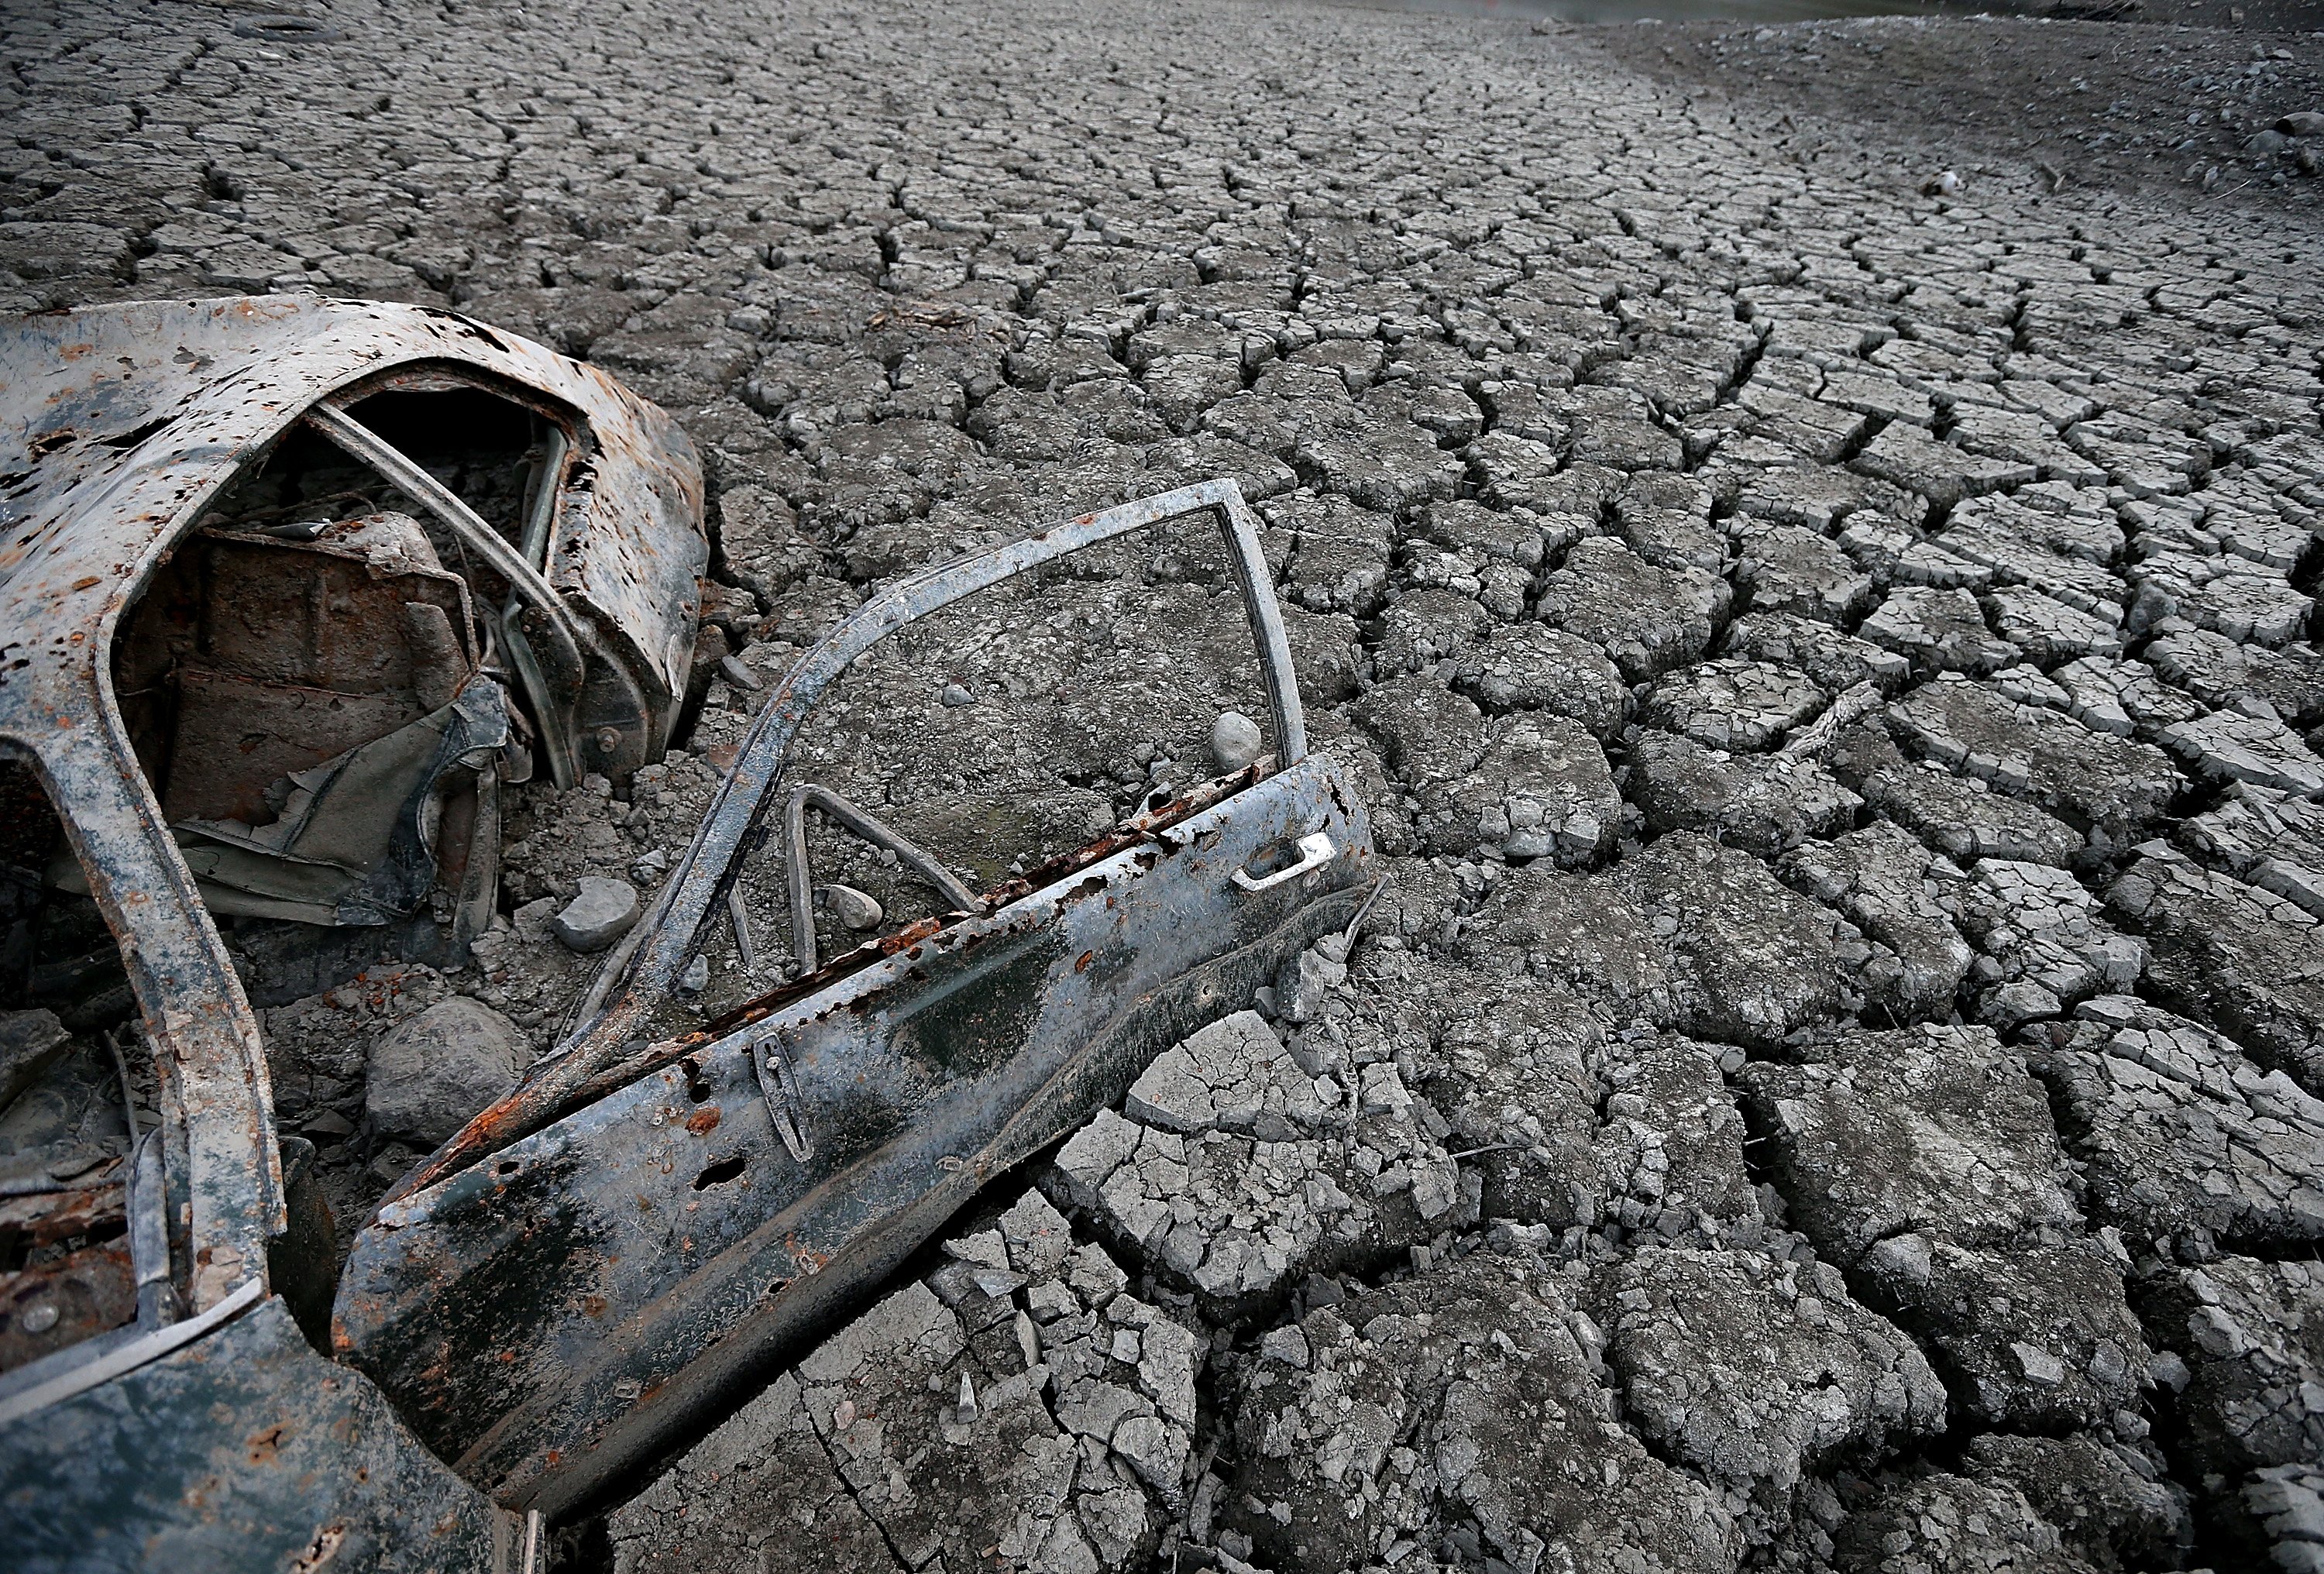 A car sits in dried and cracked earth of what was the bottom of the Almaden Reservoir on Jan. 28, 2014 in San Jose, California. (Justin Sullivan—Getty Images)